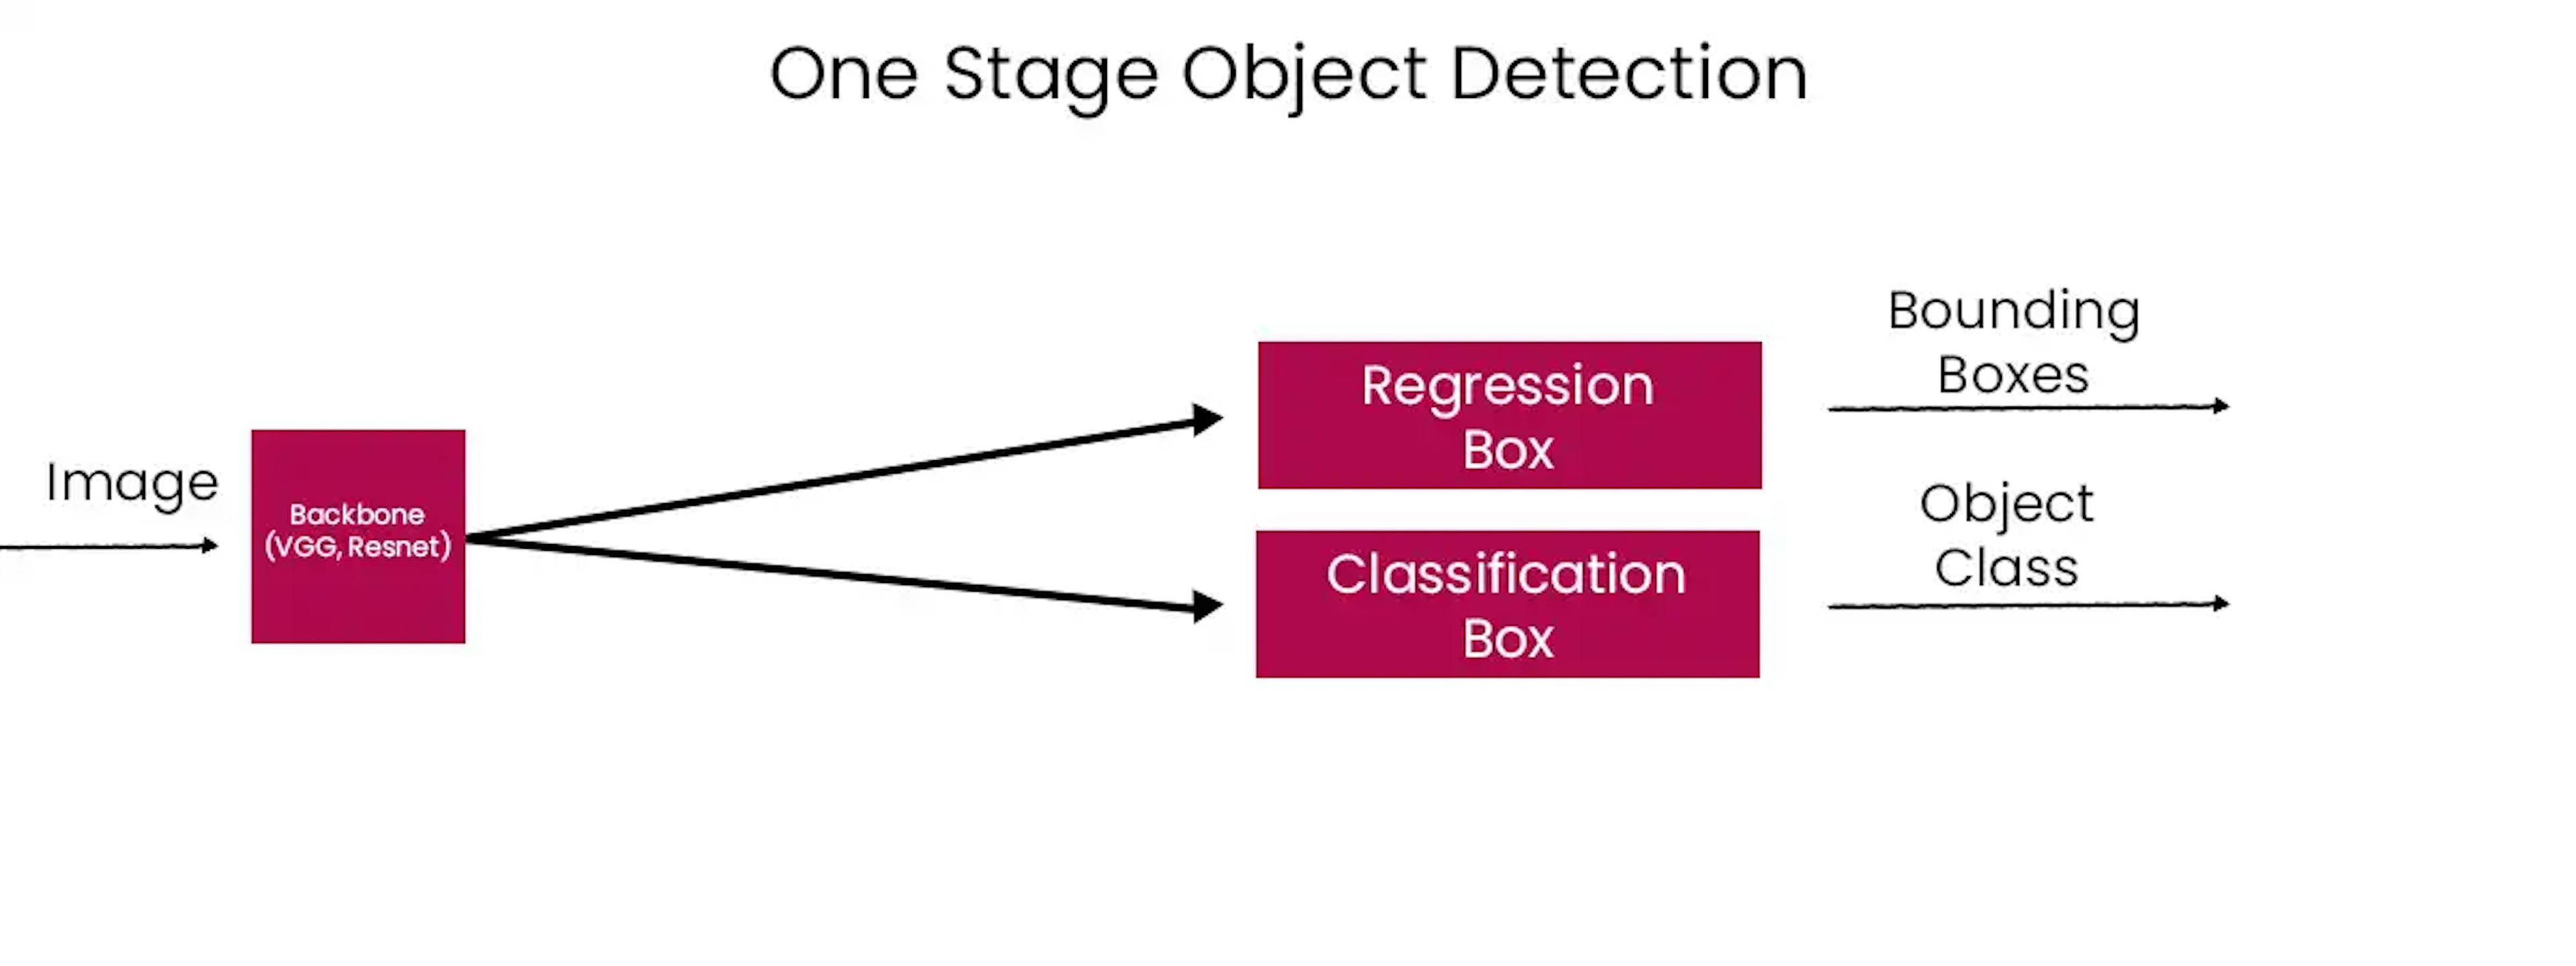 One Stage Networks of Object Detection